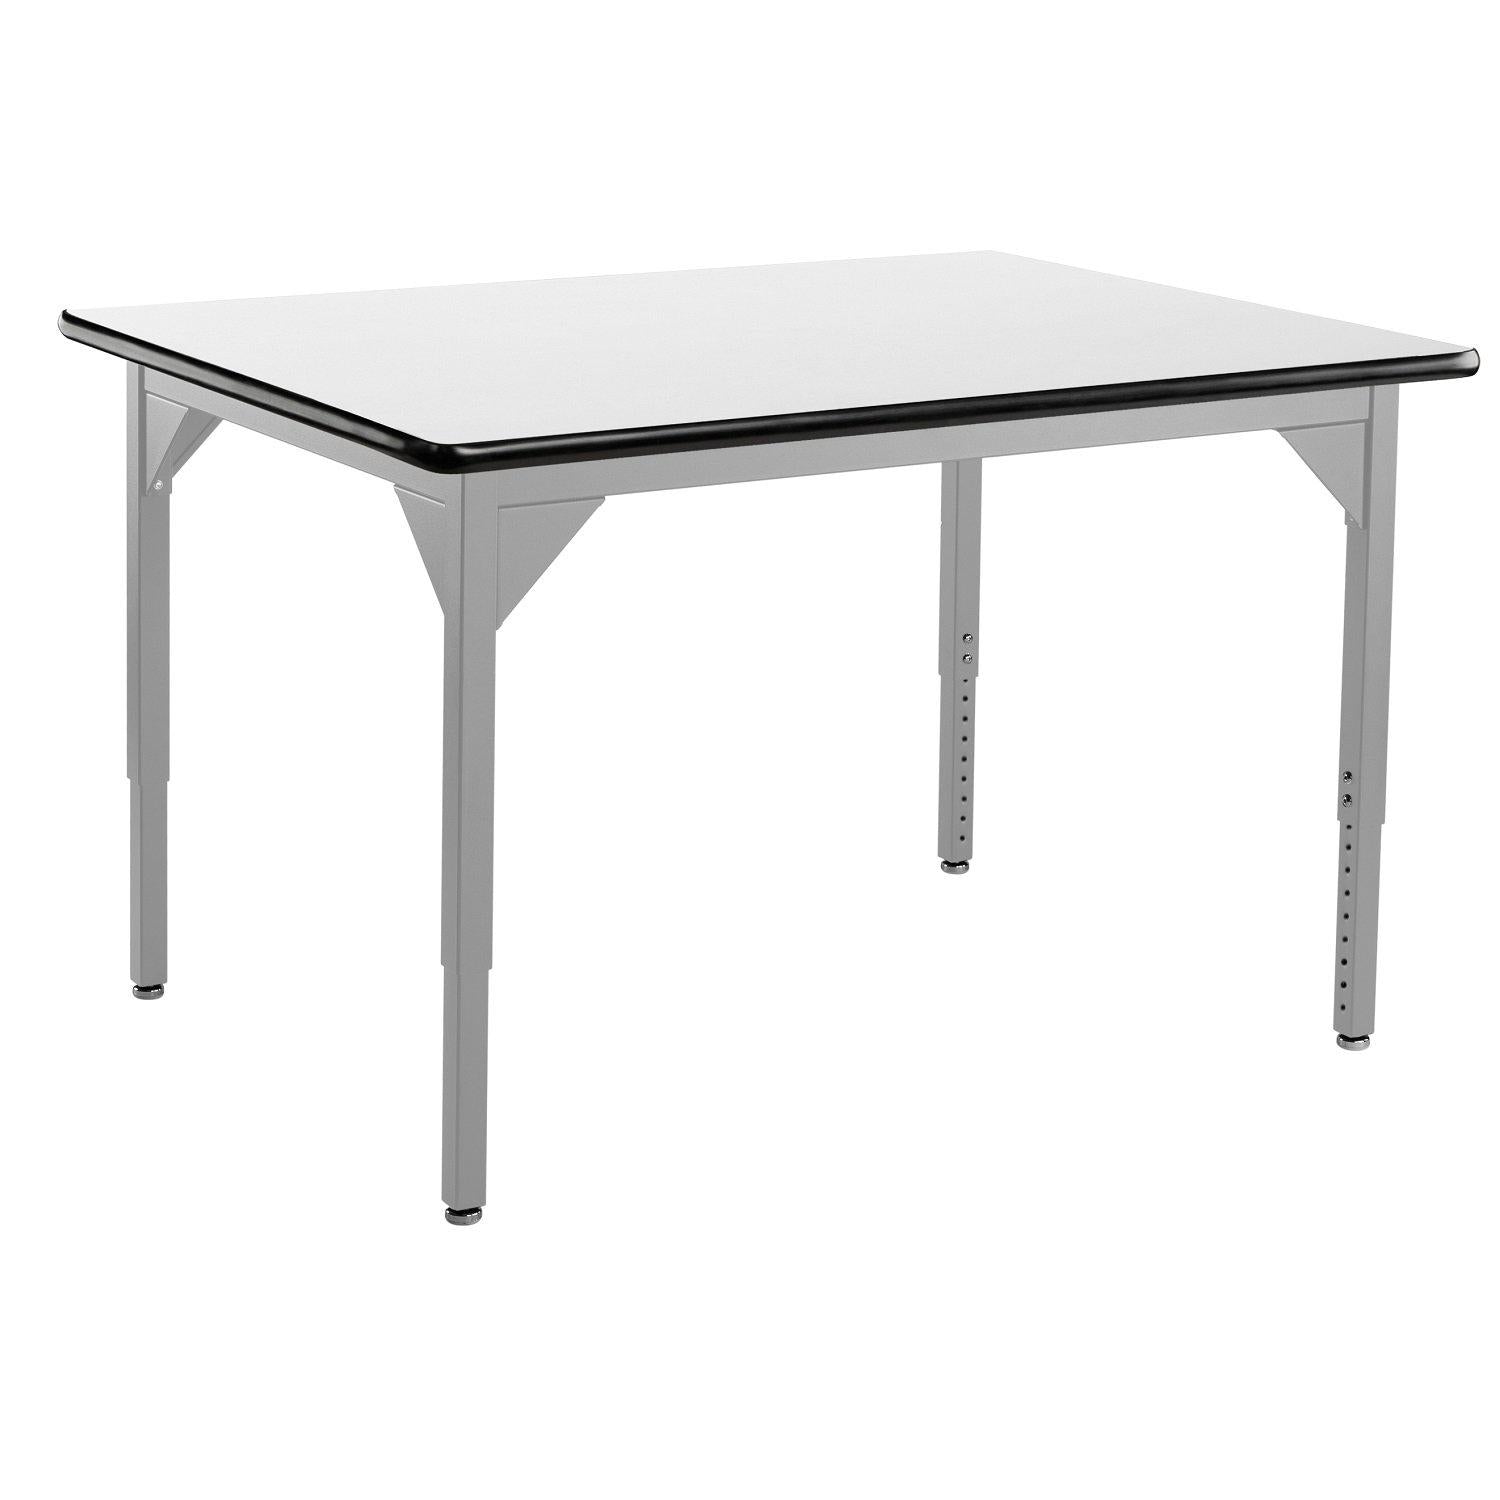 Heavy-Duty Height-Adjustable Utility Table, Soft Grey Frame, 36" x 48", Whiteboard High-Pressure Laminate Top